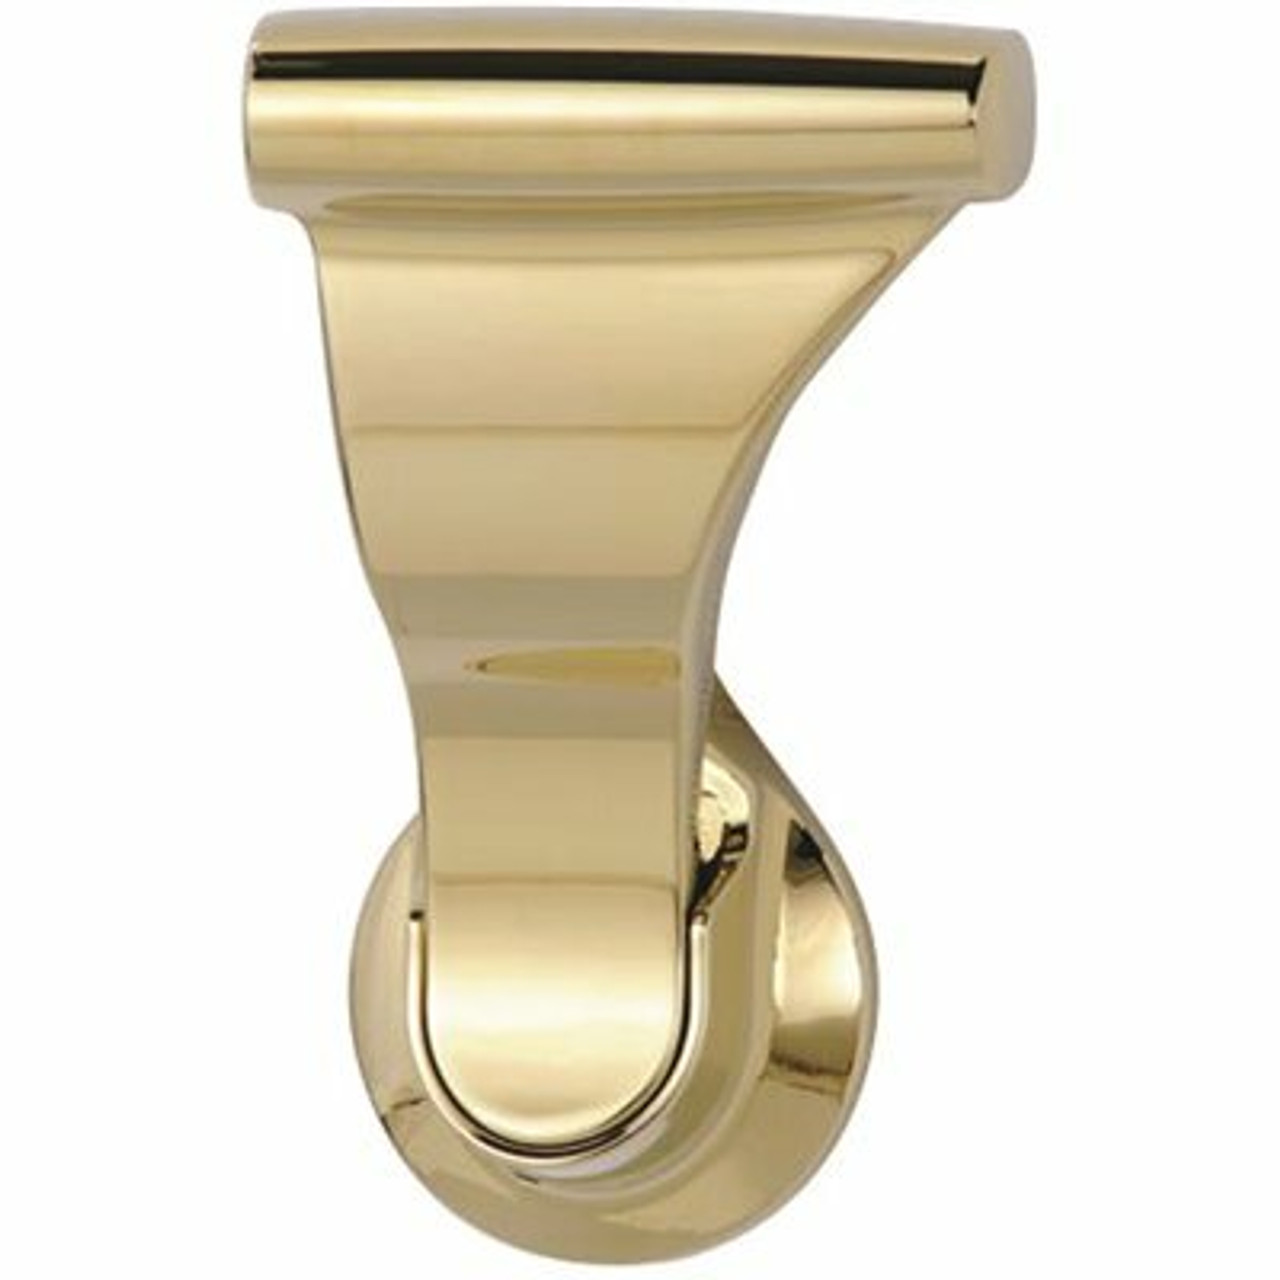 Soss 1-3/4 In. Bright Brass Push/Pull Passage Hall/Closet Latch With 2-3/8 In. Door Handle Backset